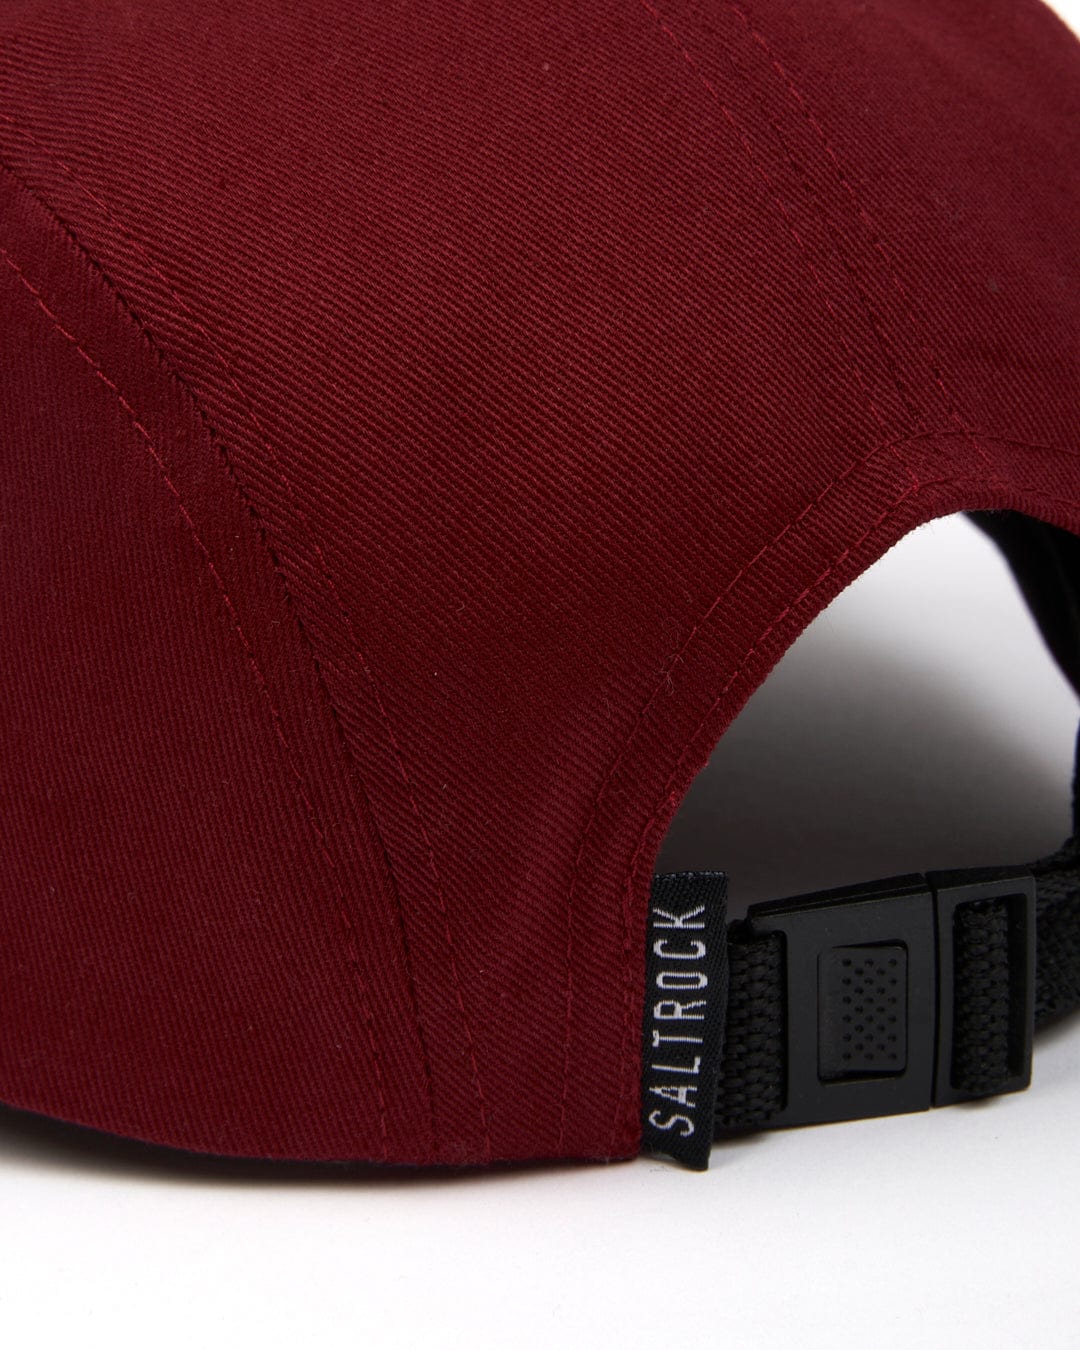 Close-up of a Saltrock Boardwalk - 5 Panel Cap - Red with an adjustable black strap and panels.